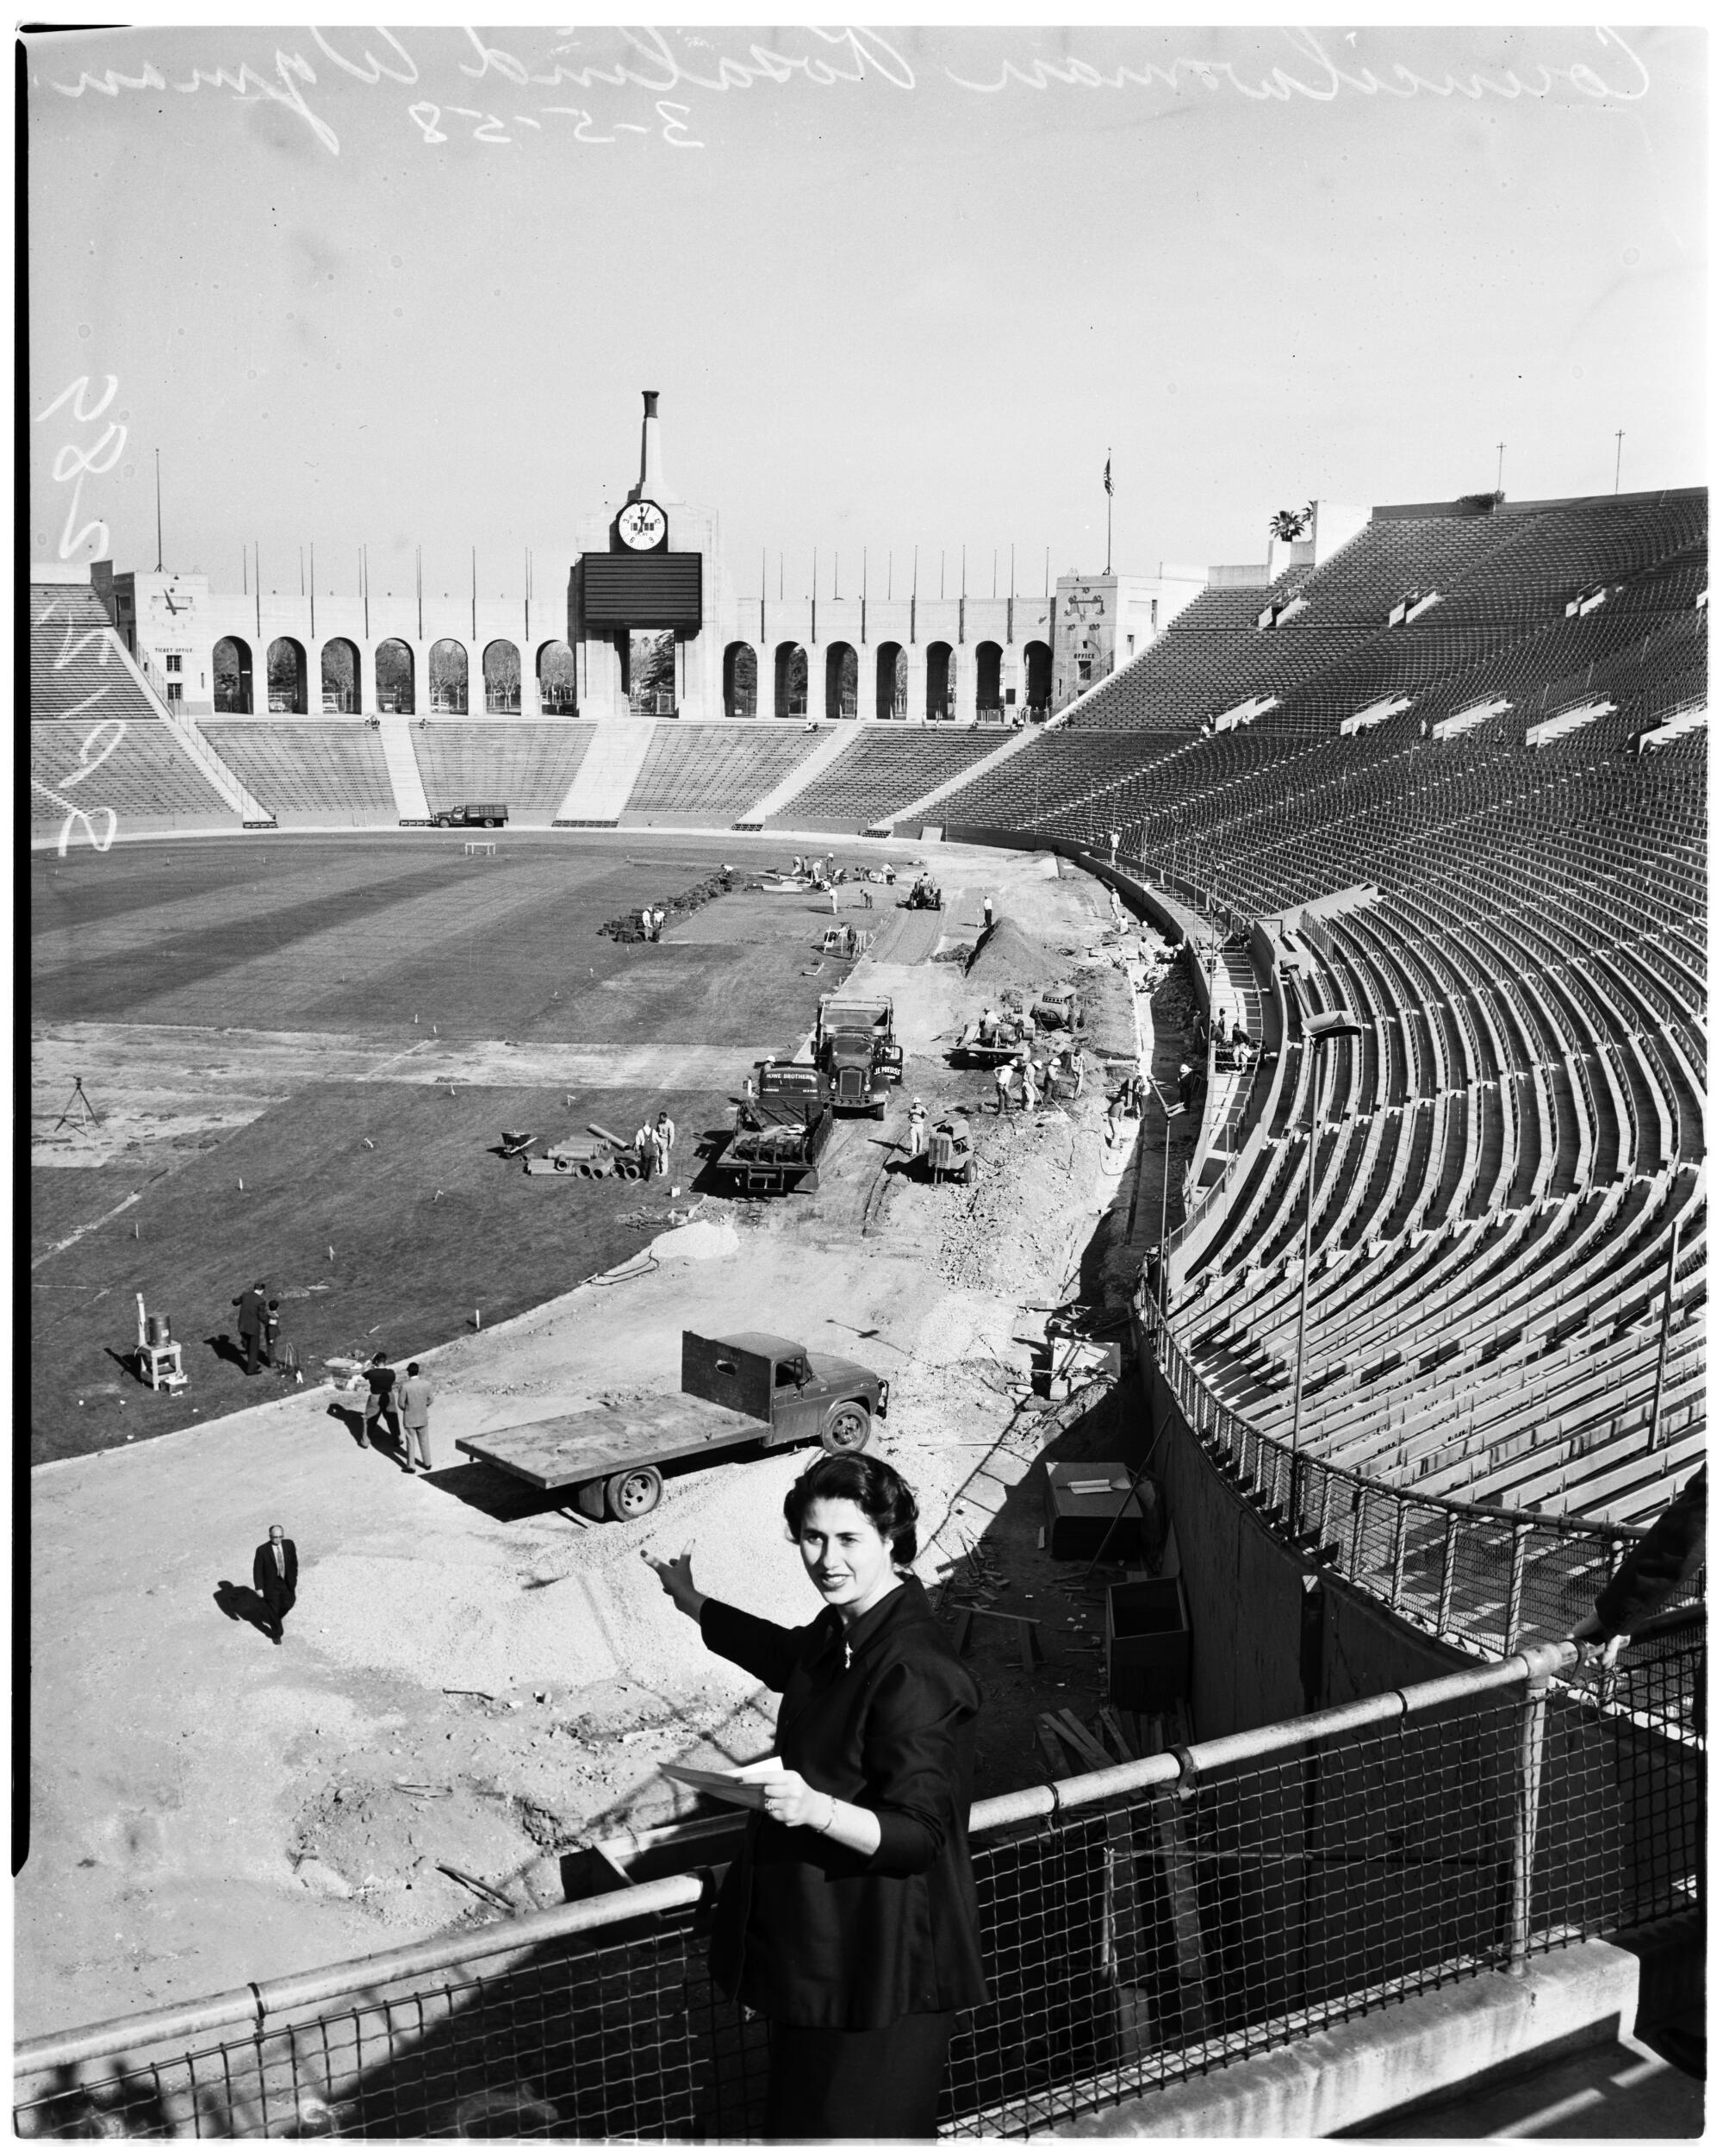 Rosalind Wyman in the stands of a coliseum while workers and vehicles were below 